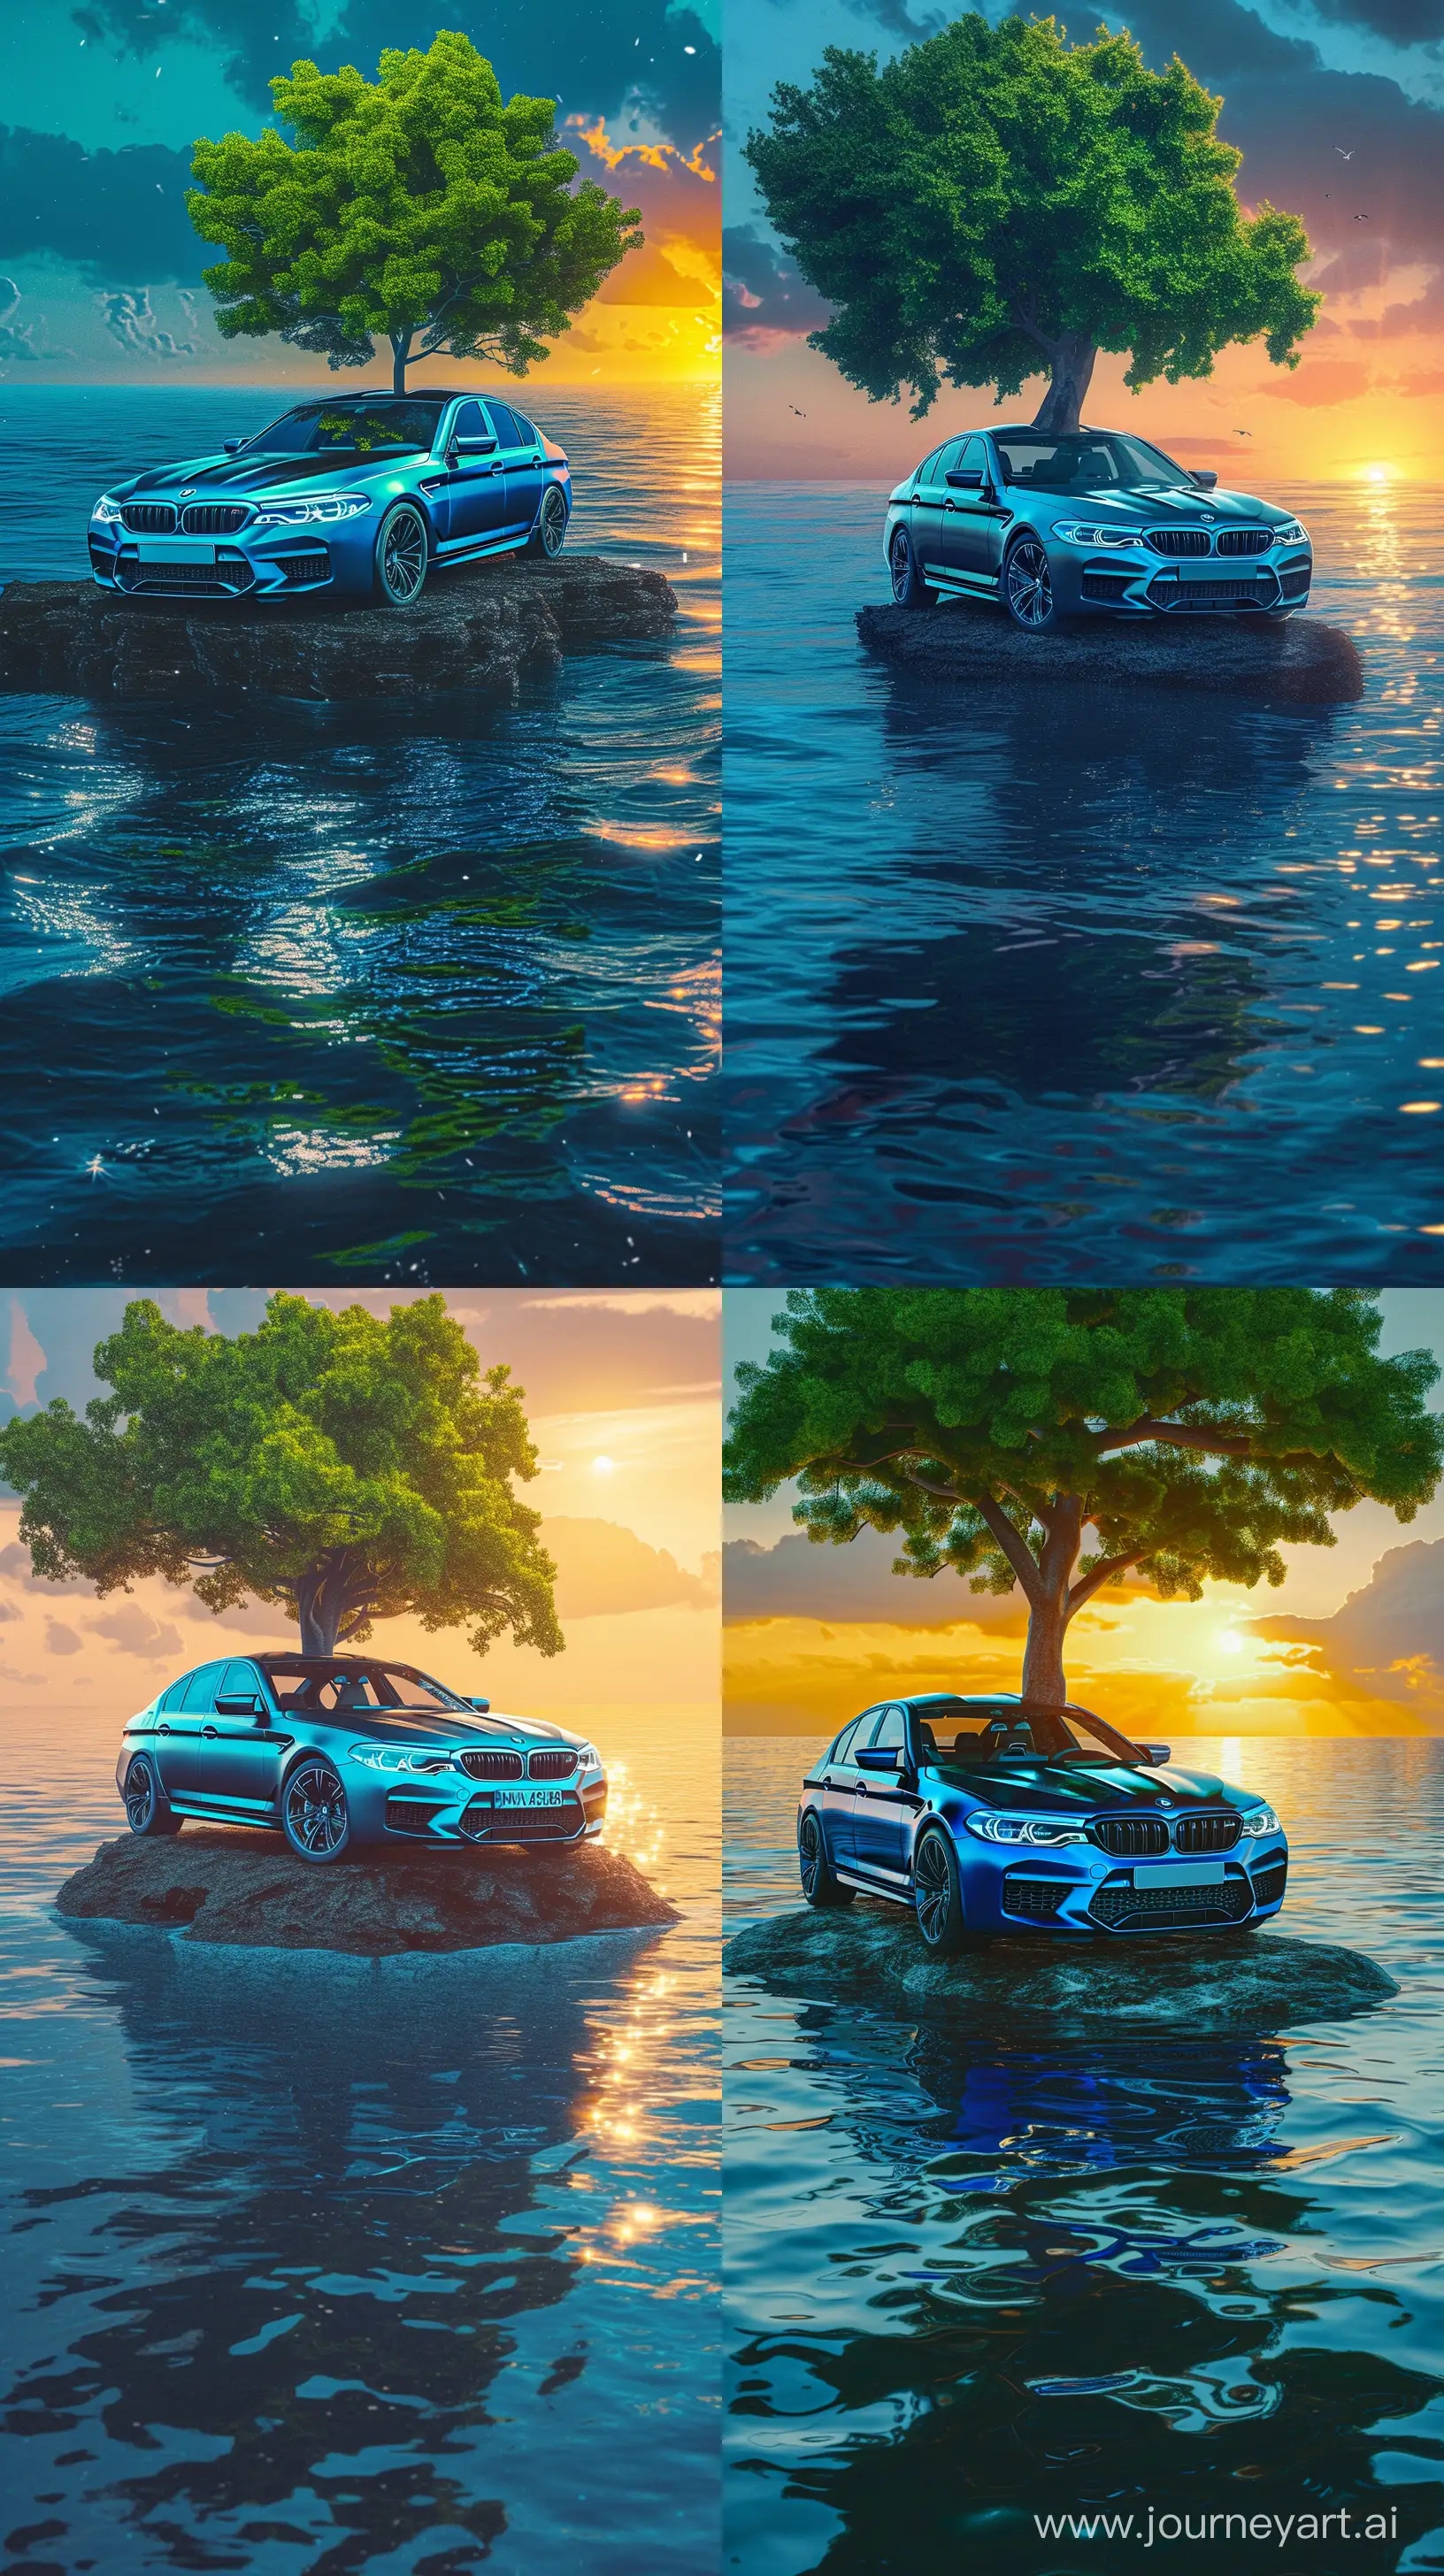 /image Painting byIvan Aivazovsky, car on top of a very Small Island in the middle of the Sea, Green Tree Back car, BMW M5 2018, Light Car On, Details of the car Blue, Sunset, Realistic Sunlight Reflections on the Sea, High Precision --ar 9:16